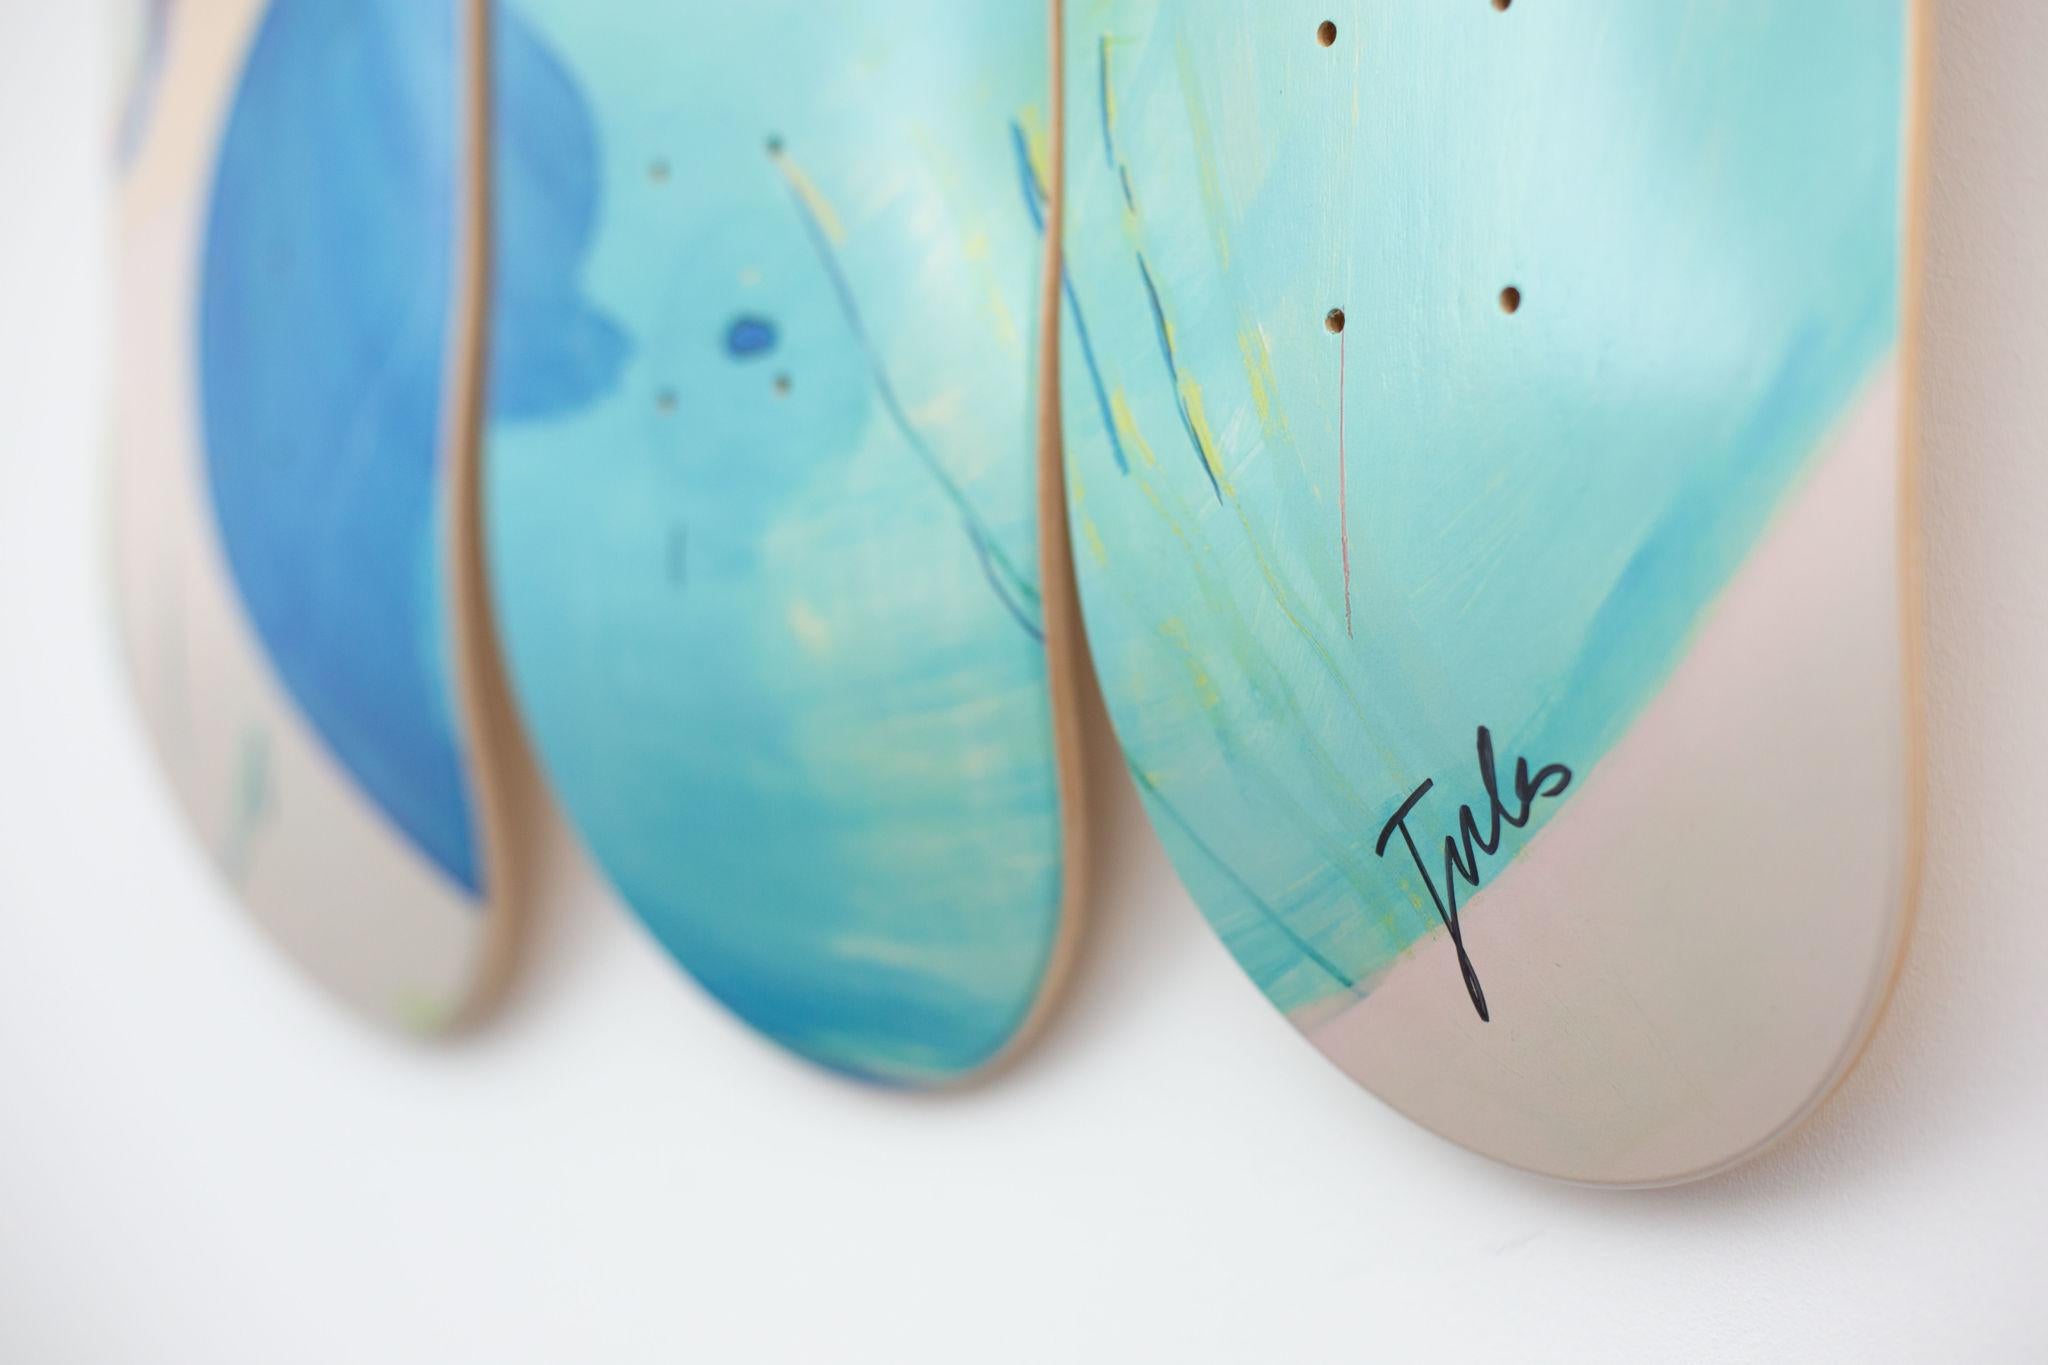 The Skateroom w/ Jules de Balincourt
three skateboard decks
7-ply Canadian Maplewood with screen-print
31 H. x 8 inches, each
mounting hardware included
edition of 50
hand-signed by the artist


This limited edition skateboard triptych features the